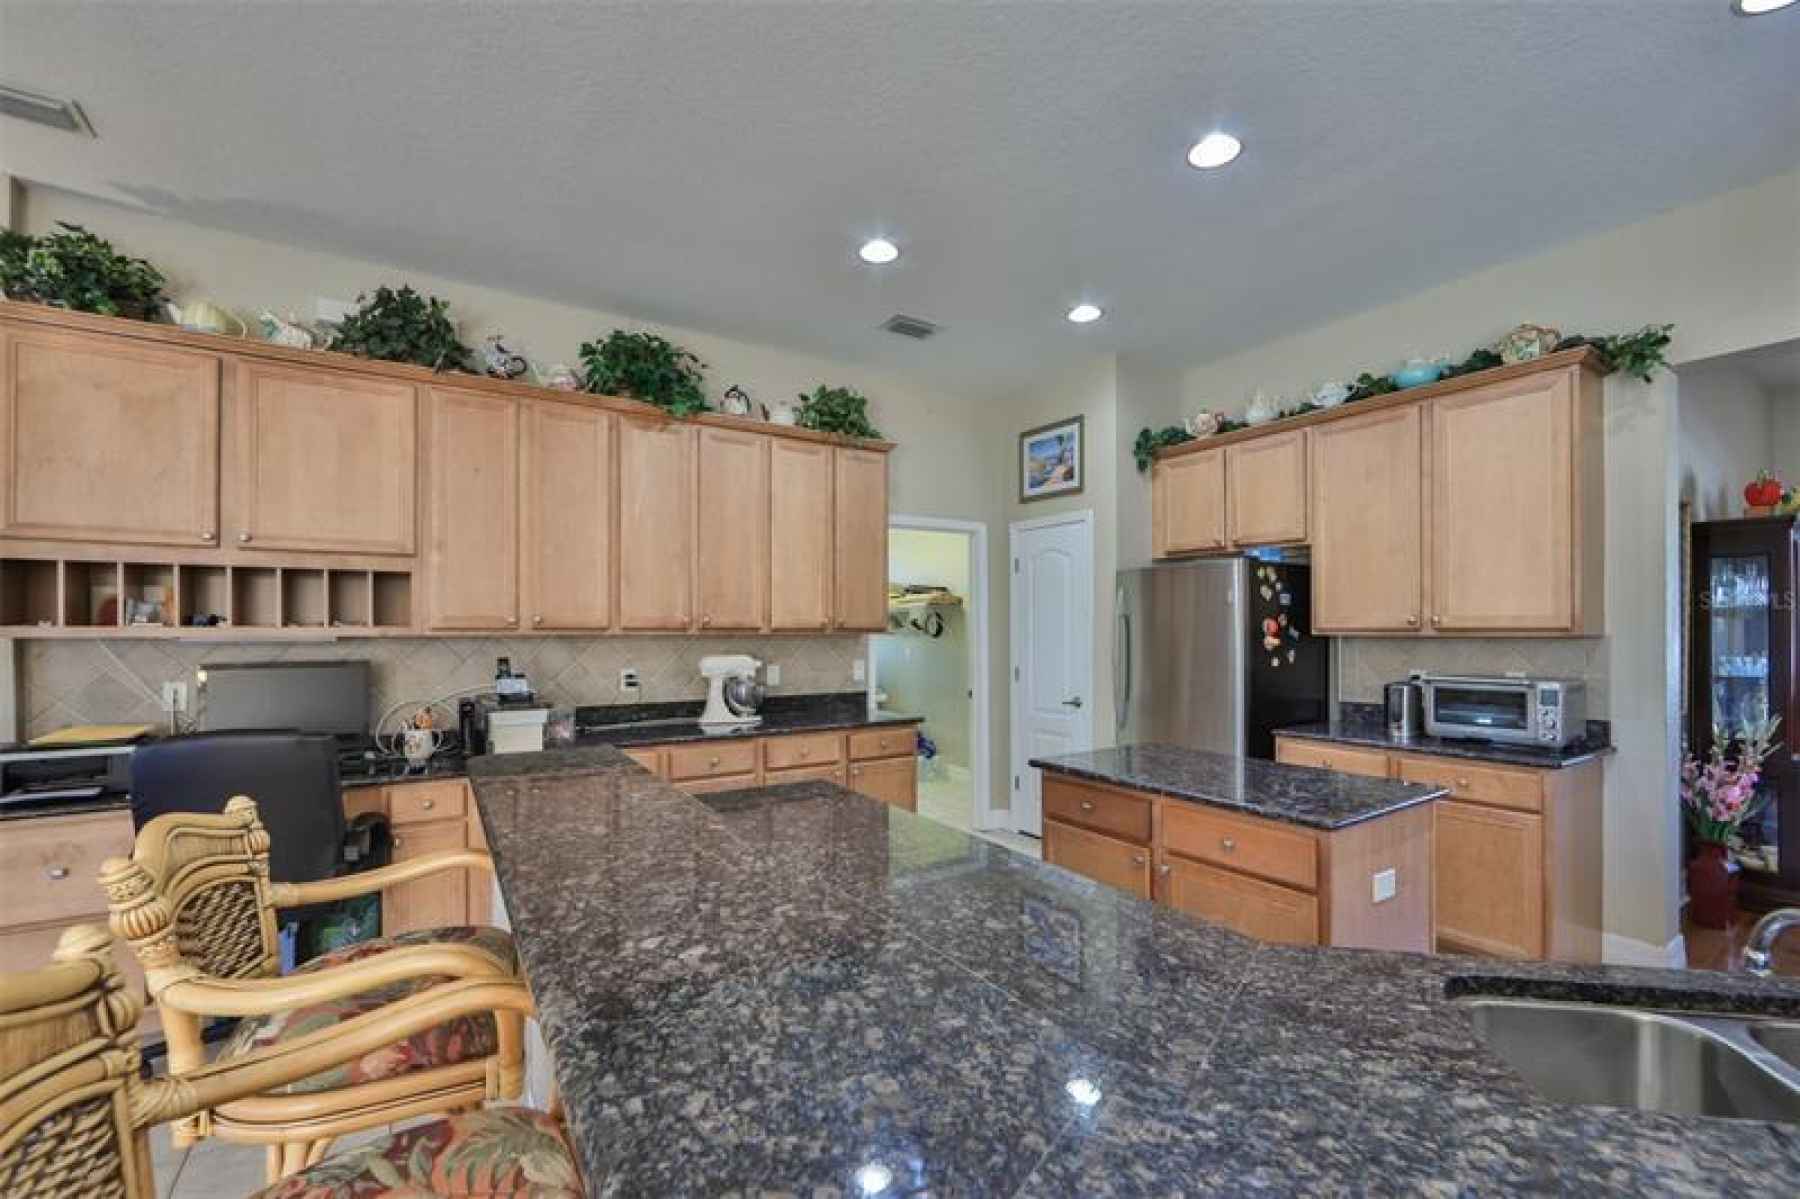 Granite counters with kitchen island. Cabinet storage galore, closet pantry and island storage. Sepe